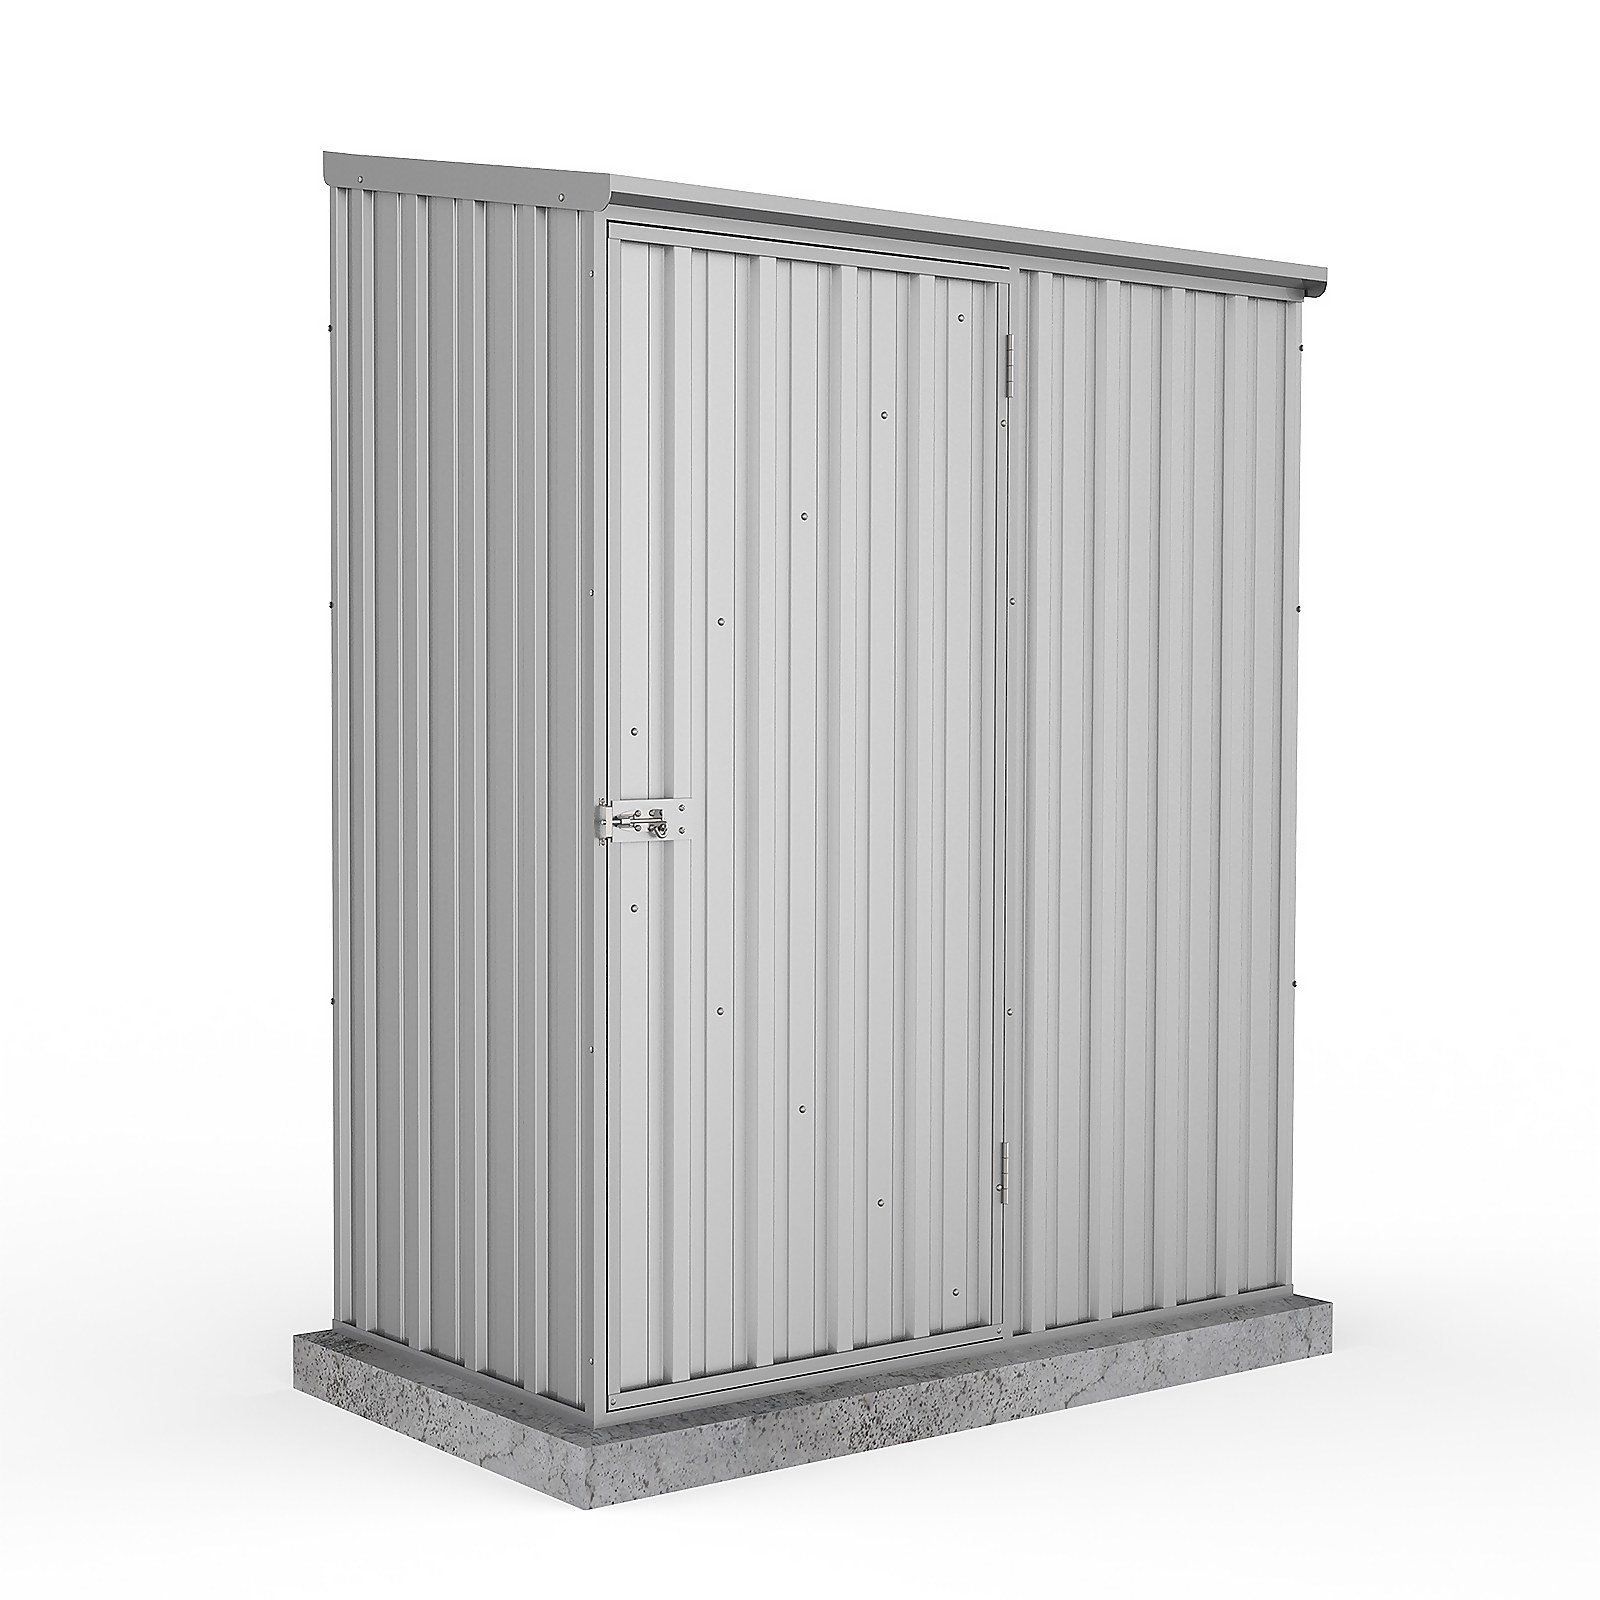 Absco 5 x 3ft Space Saver Metal Pent Shed - Zinc